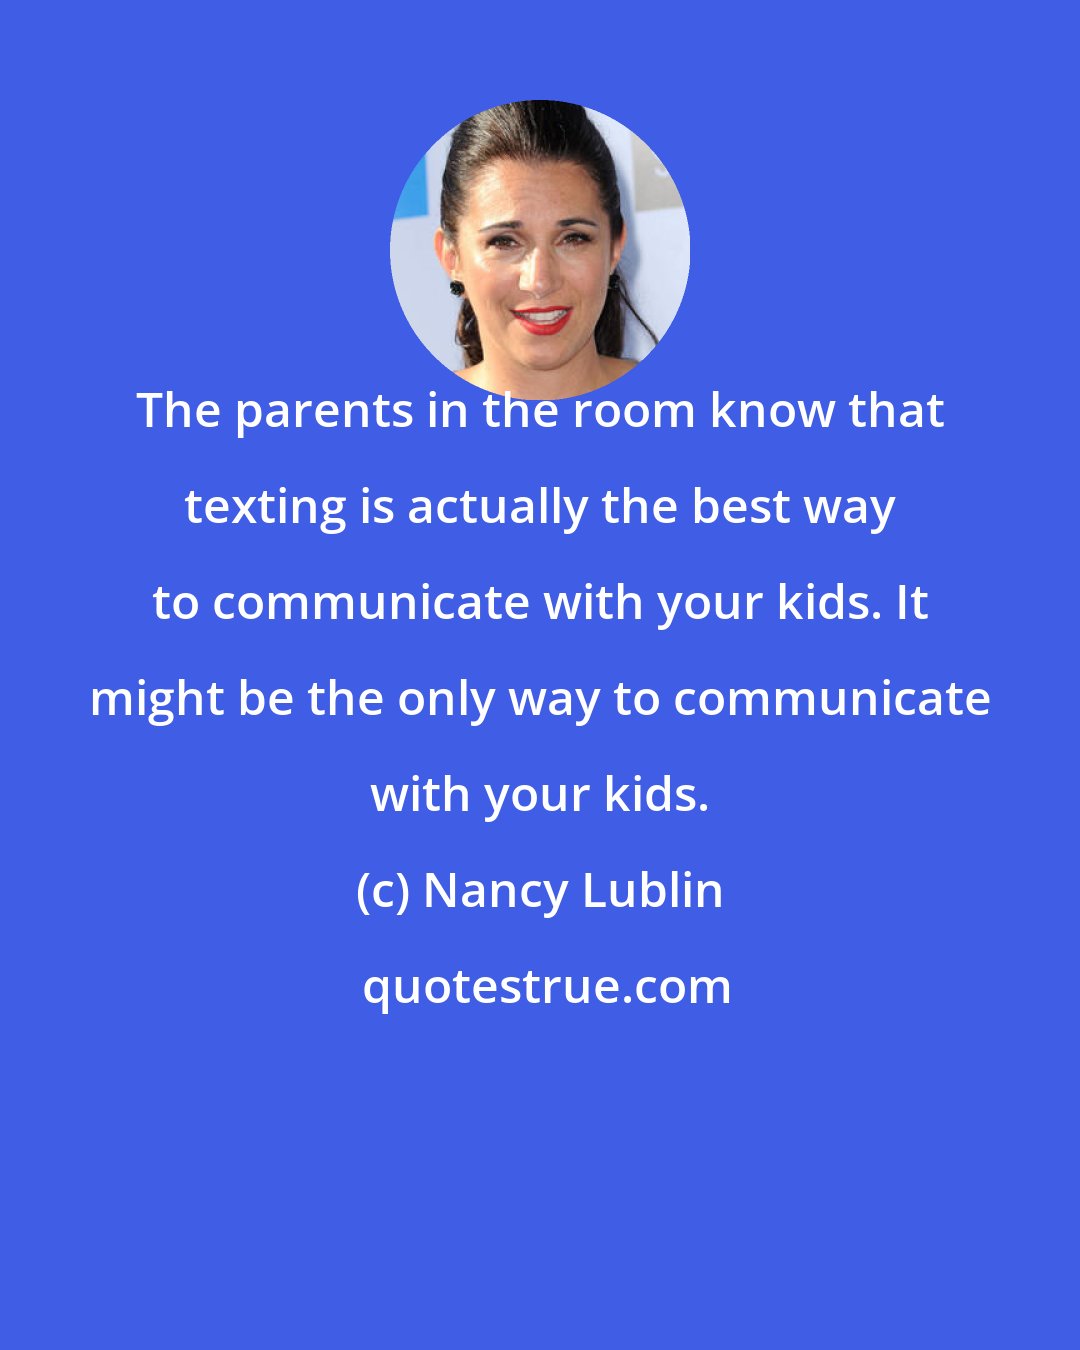 Nancy Lublin: The parents in the room know that texting is actually the best way to communicate with your kids. It might be the only way to communicate with your kids.